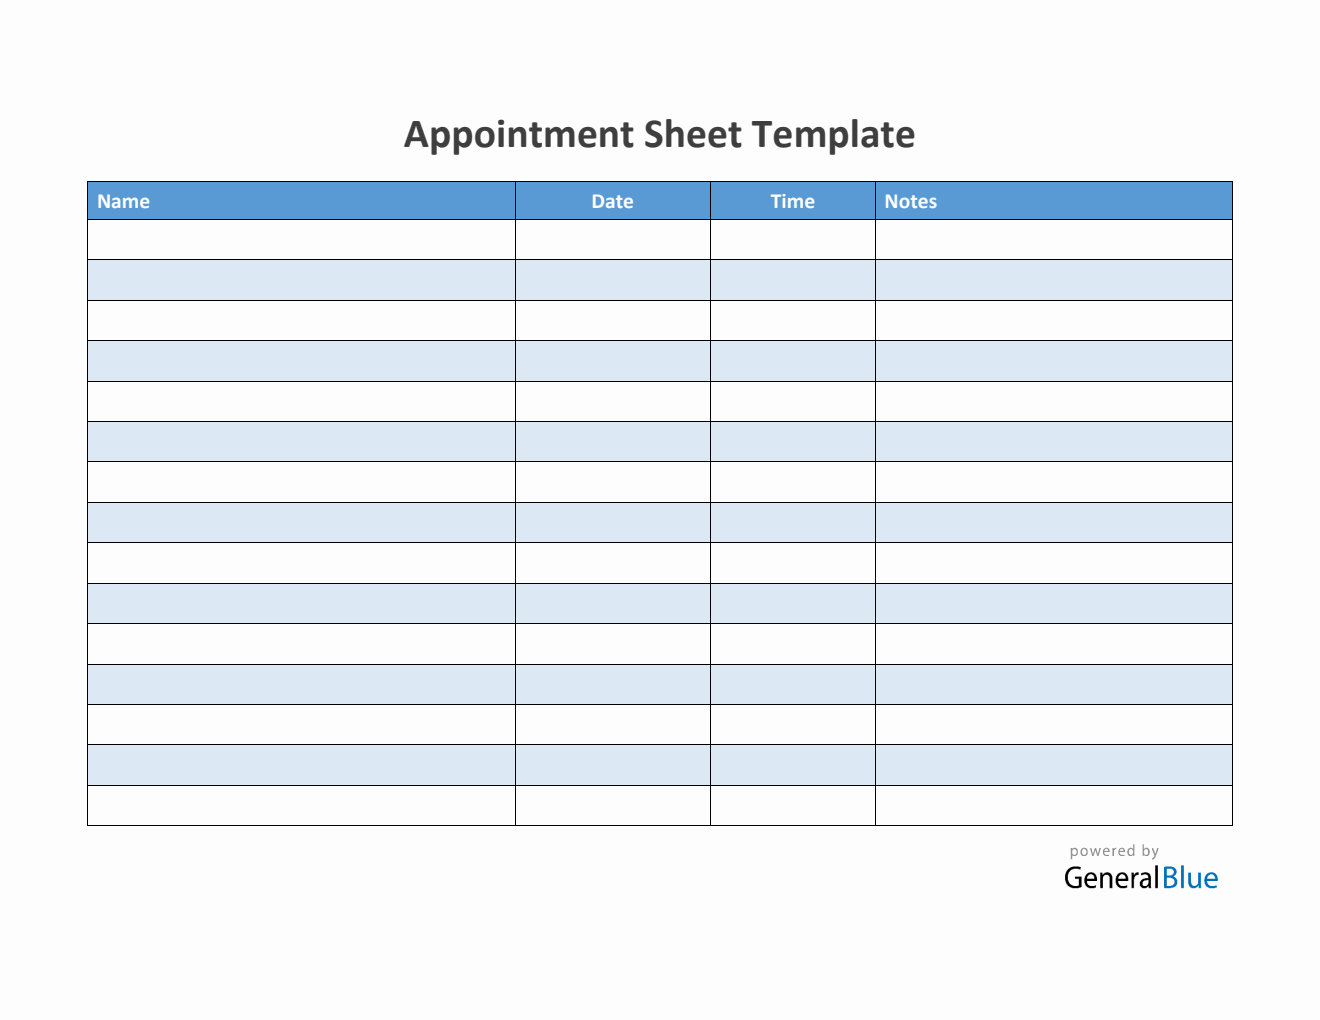 Simple Appointment Sheet Template in Word (Colorful)